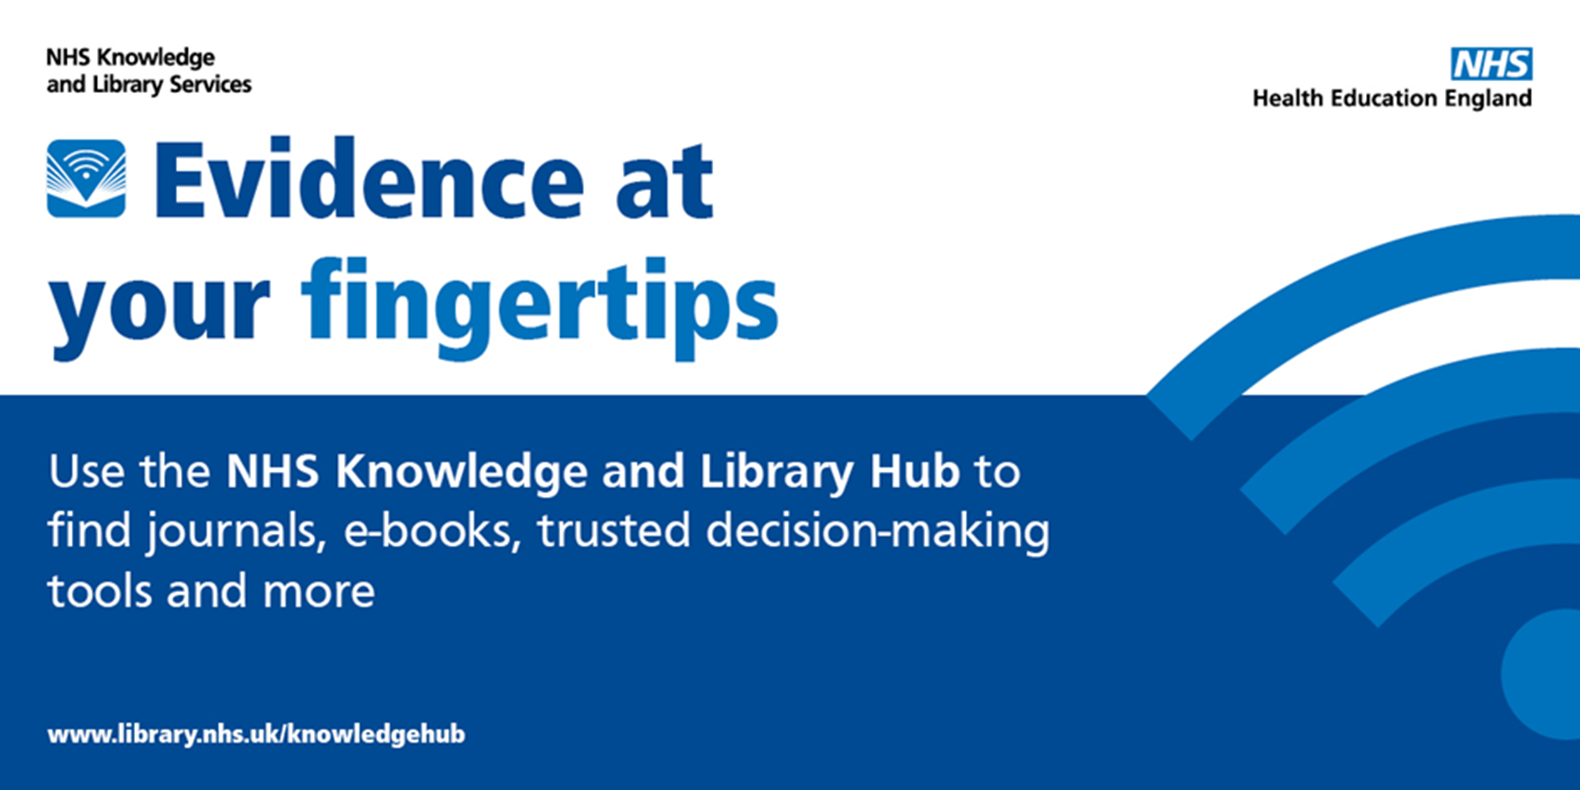 NHS Knowledge and Library Services - NHS Health Education England. Evidence at your fingertips. Use the NHS Knowledge and Library Hub to find journals, e-books, trusted decision-making tools and more. www.library.nhs.nuk/knowledgehub